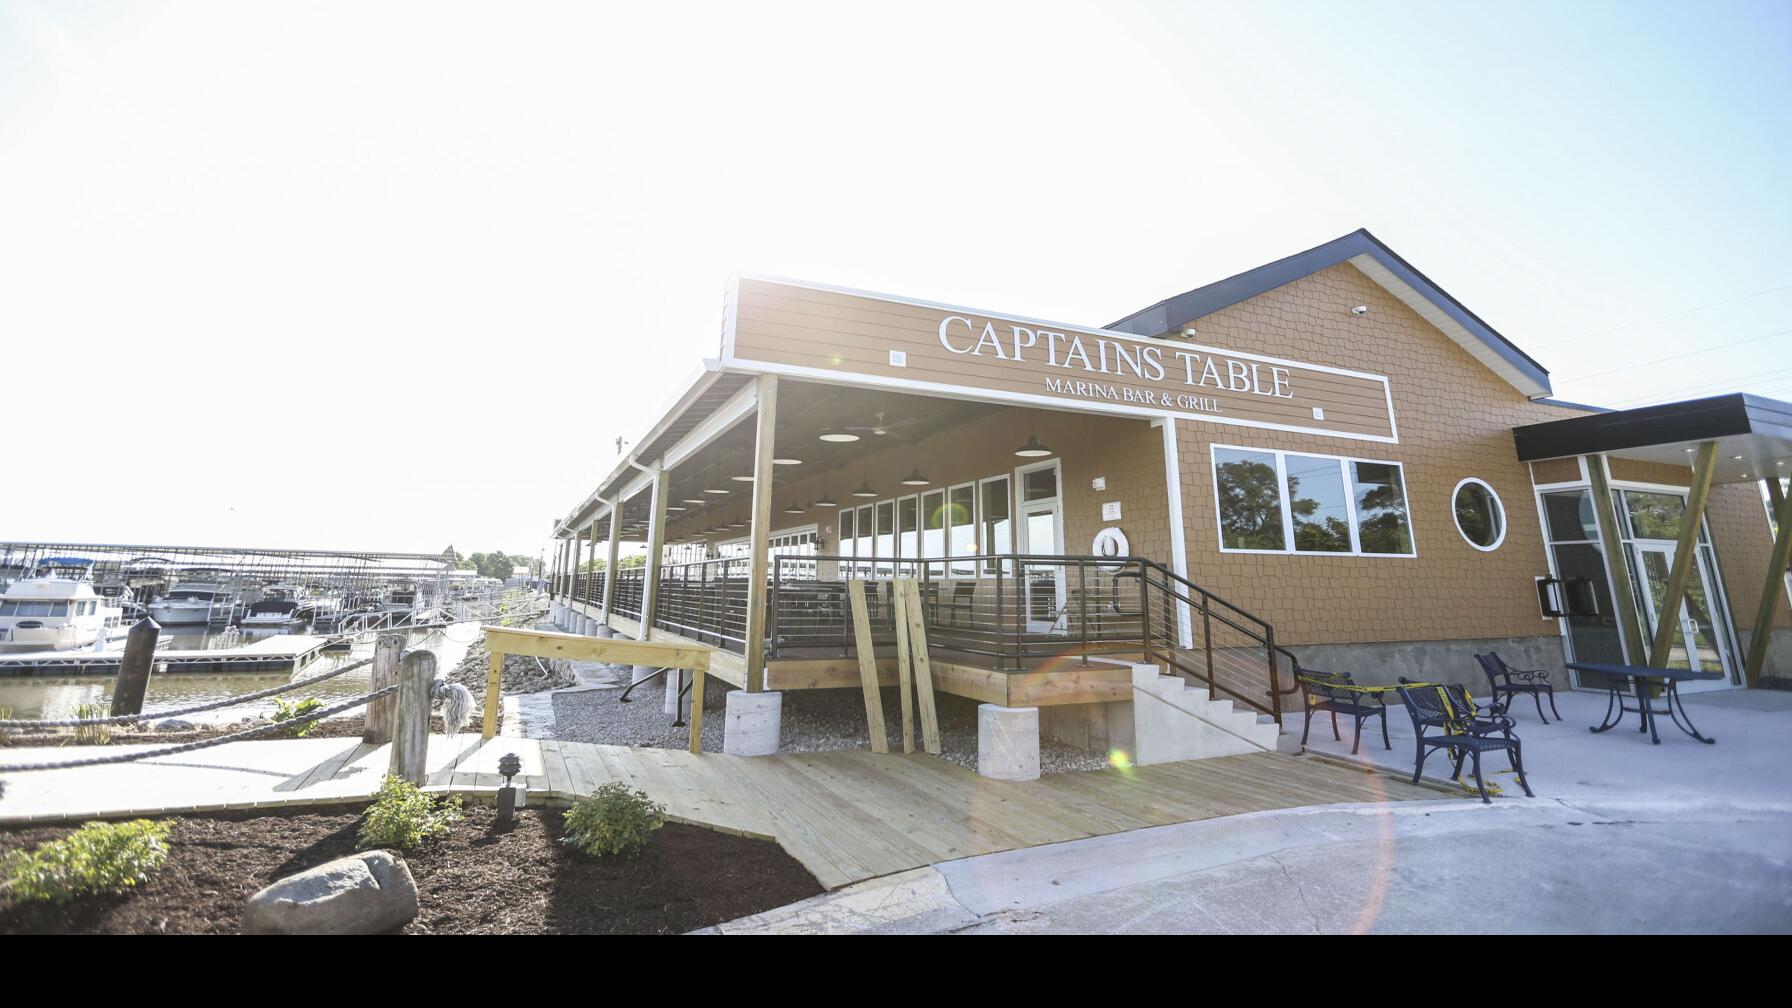 The Captains Table In Moline Has An Opening In The Offing Local News Qconlinecom